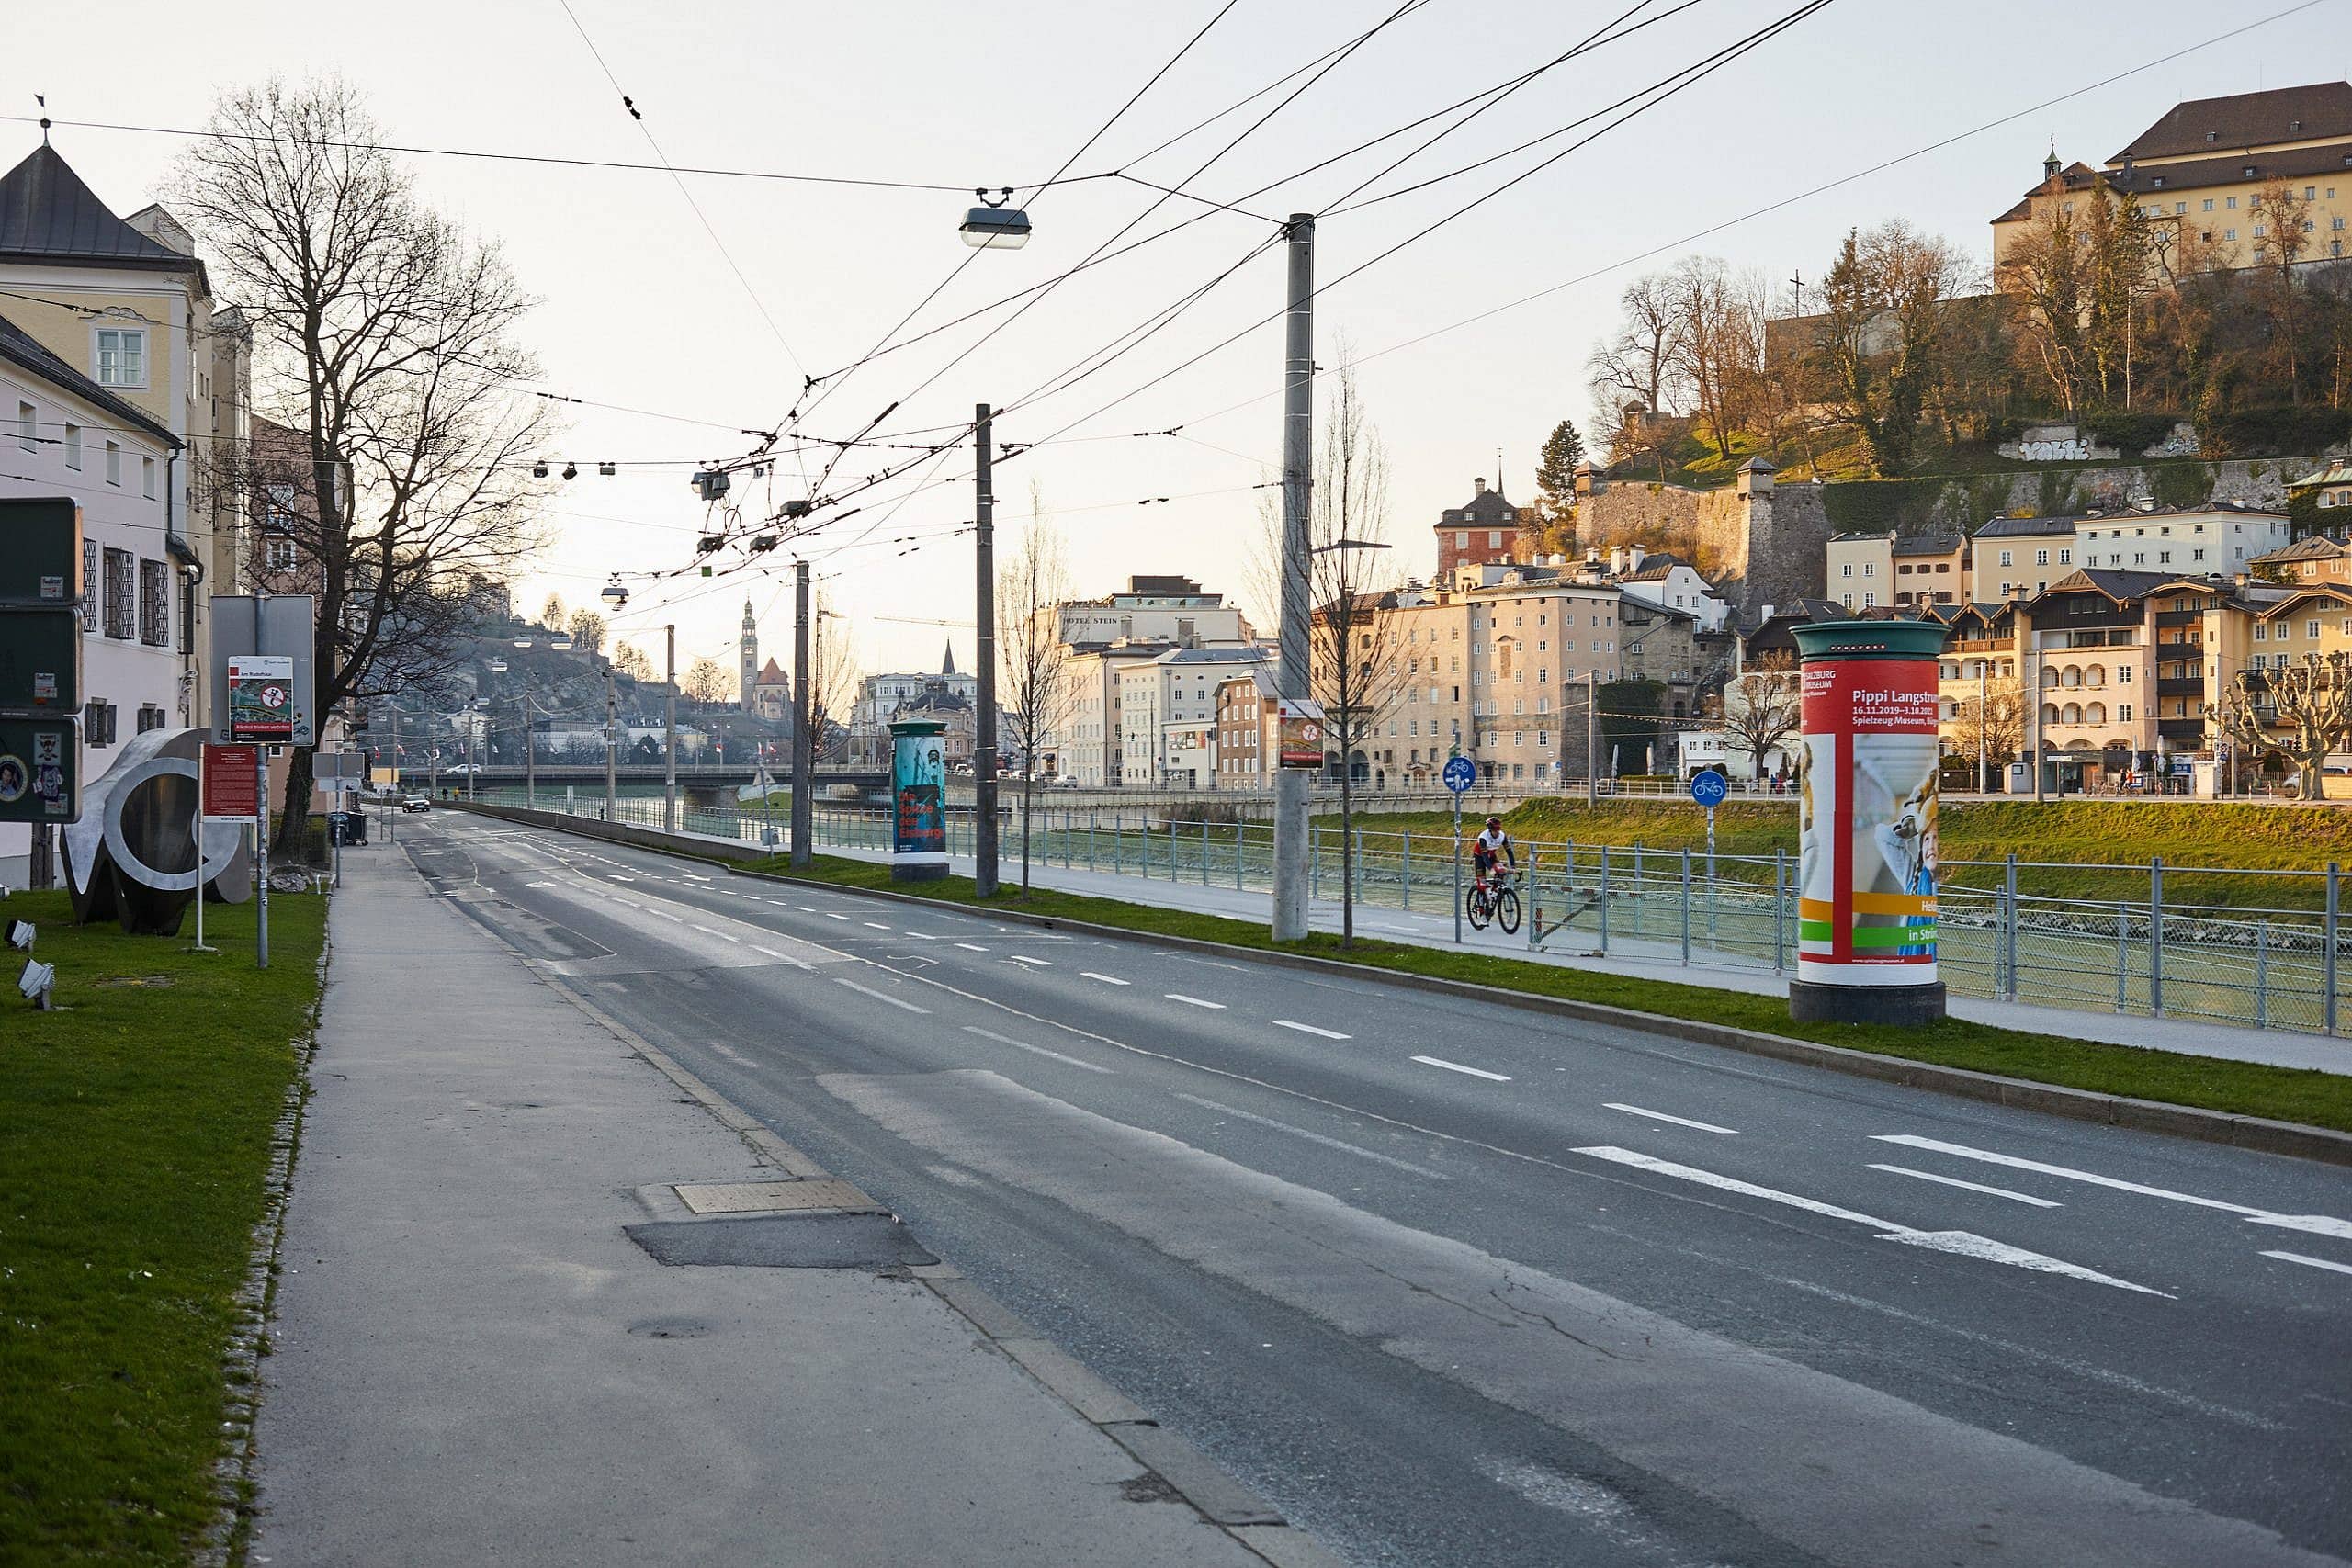 A photograph showing the empty Streets of Salzburg, Rudolfskai